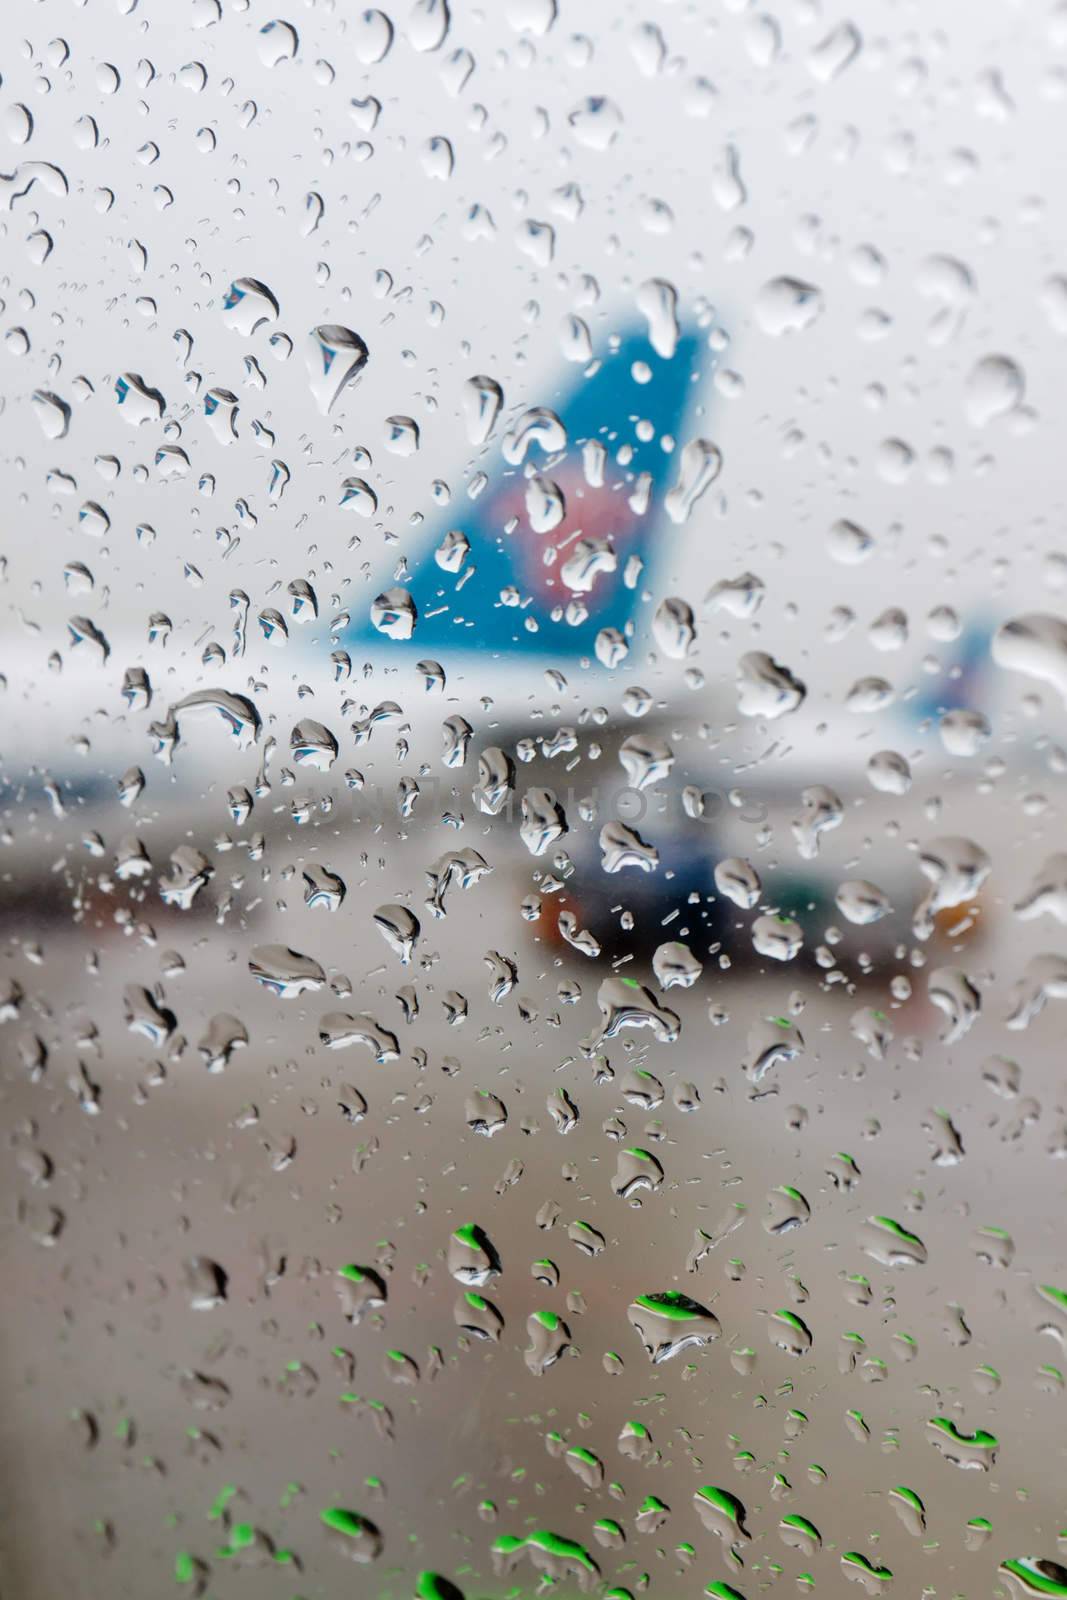 Water drops on an aircraft window with airplanes on a background